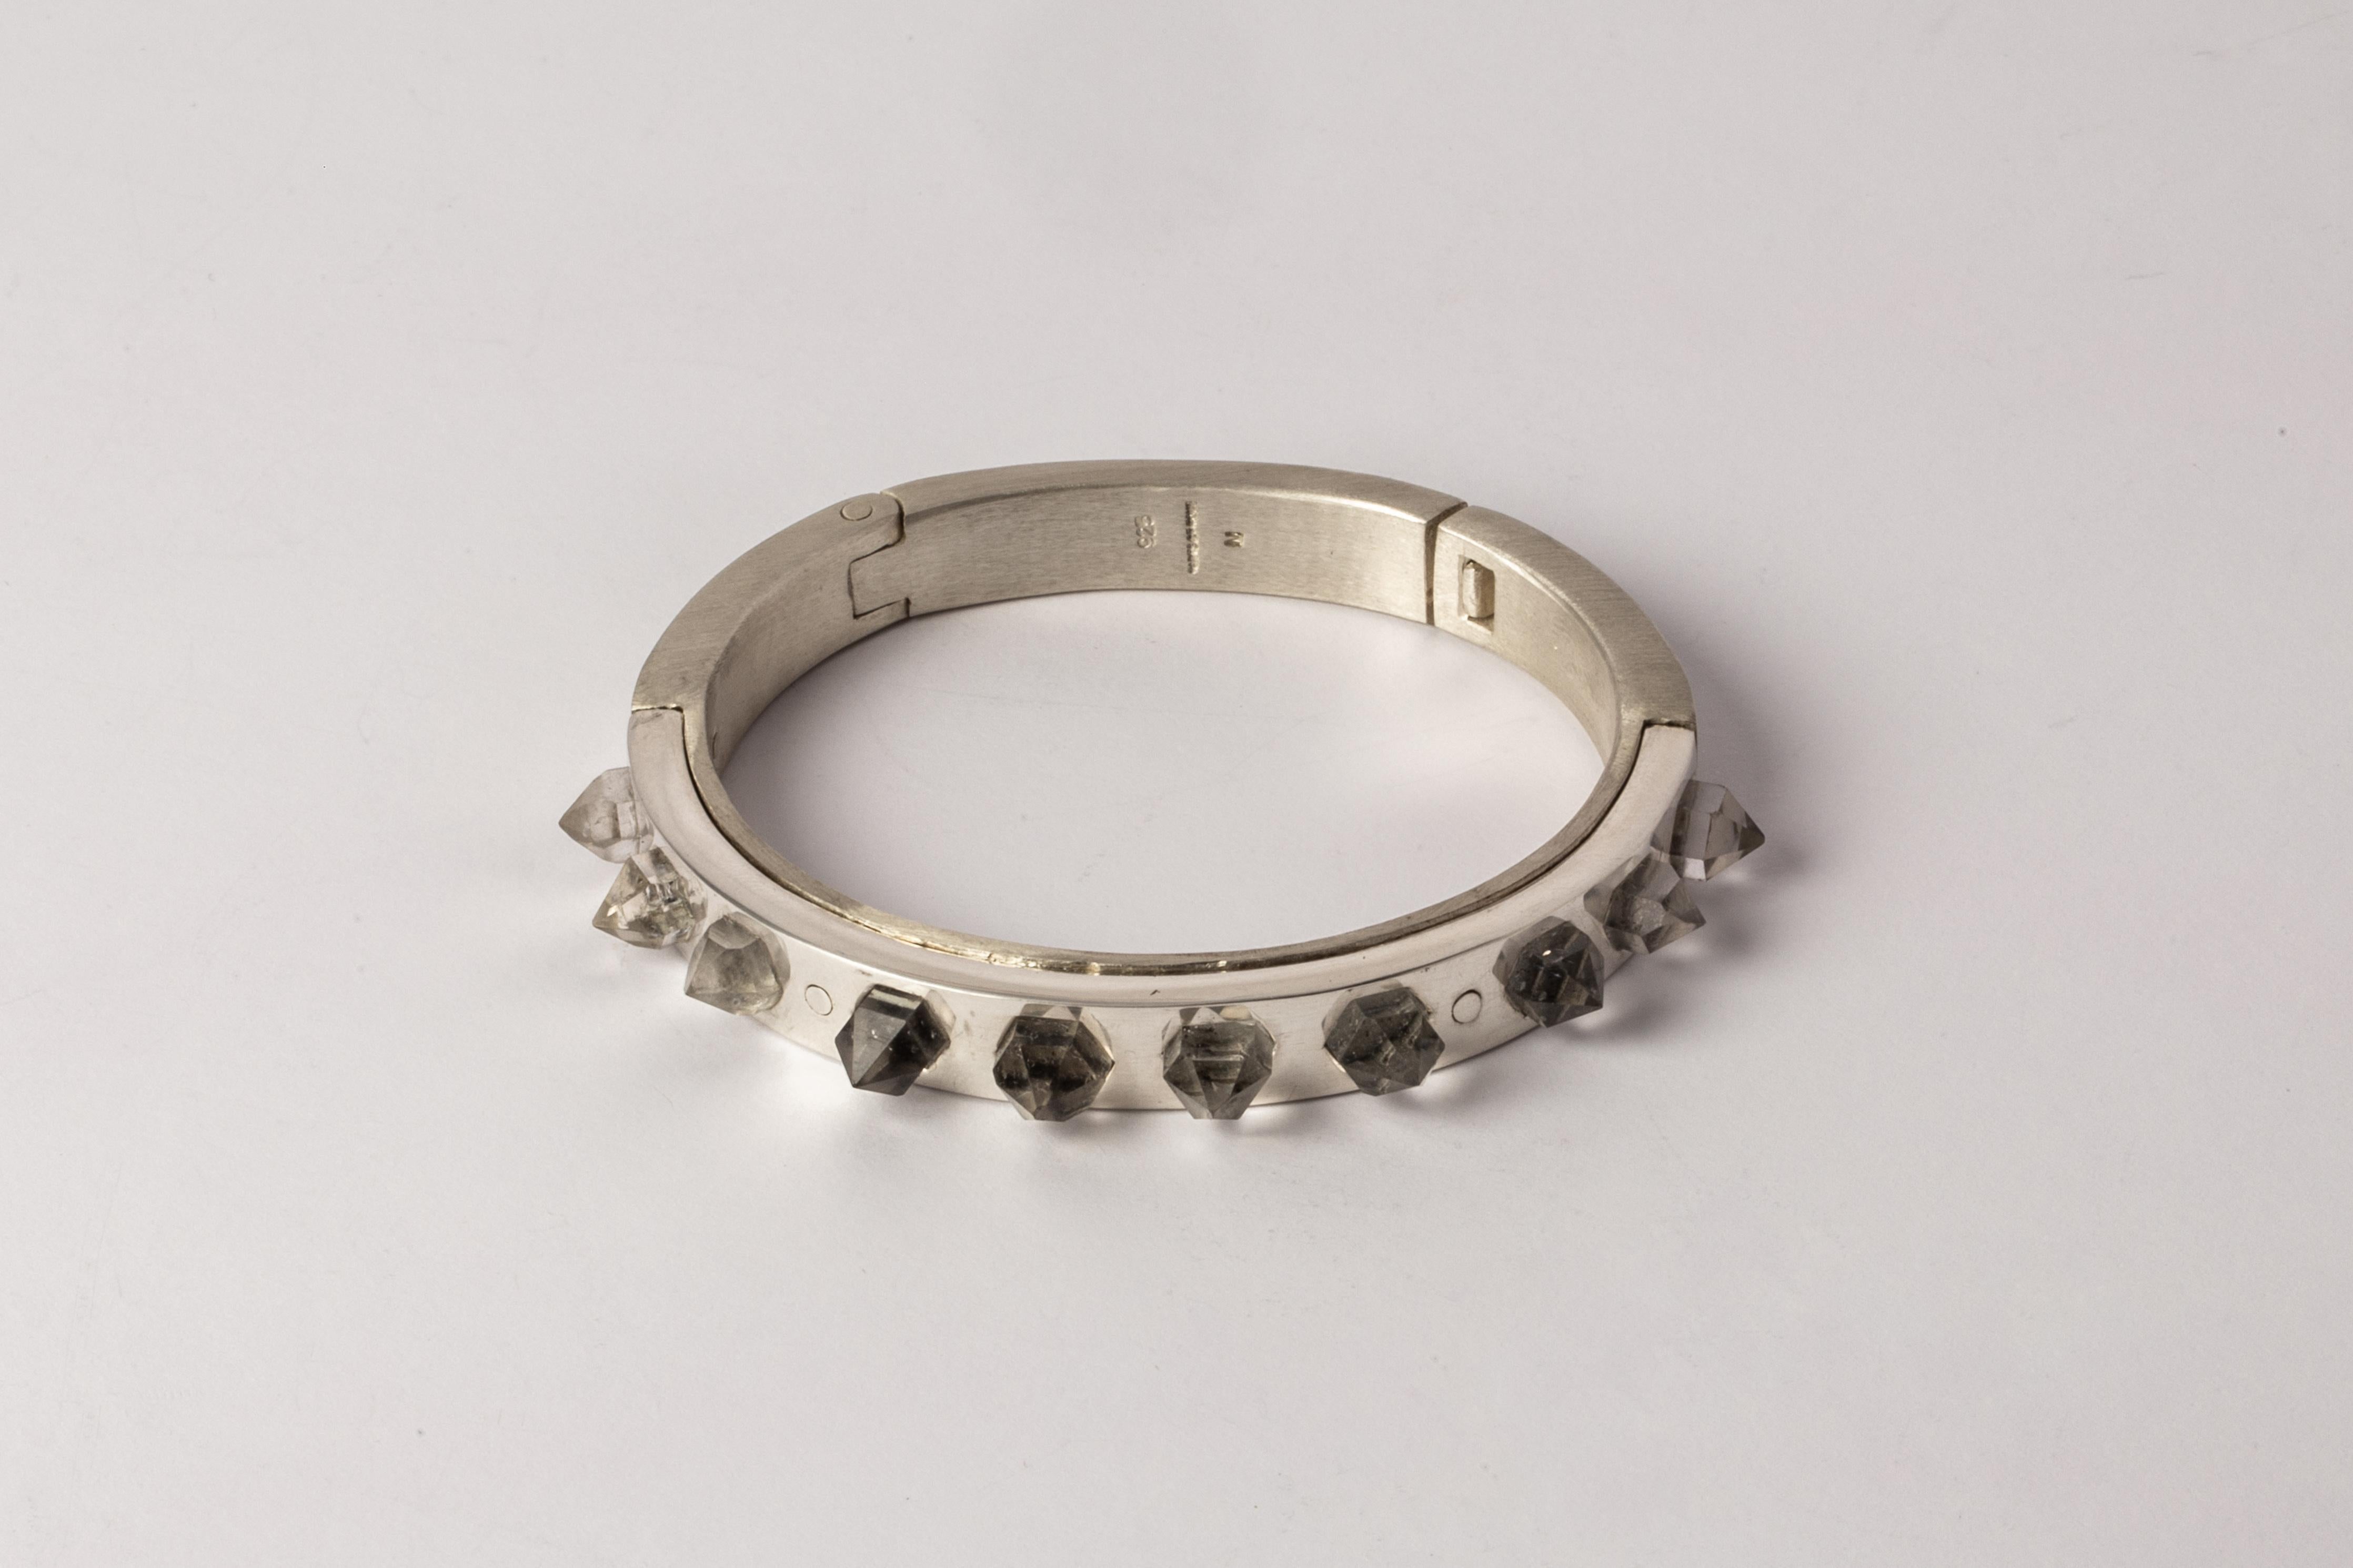 Sistema Bracelet V2 (Herkimer Spikes, 9mm, MA+PA+HER) In New Condition For Sale In Hong Kong, Hong Kong Island